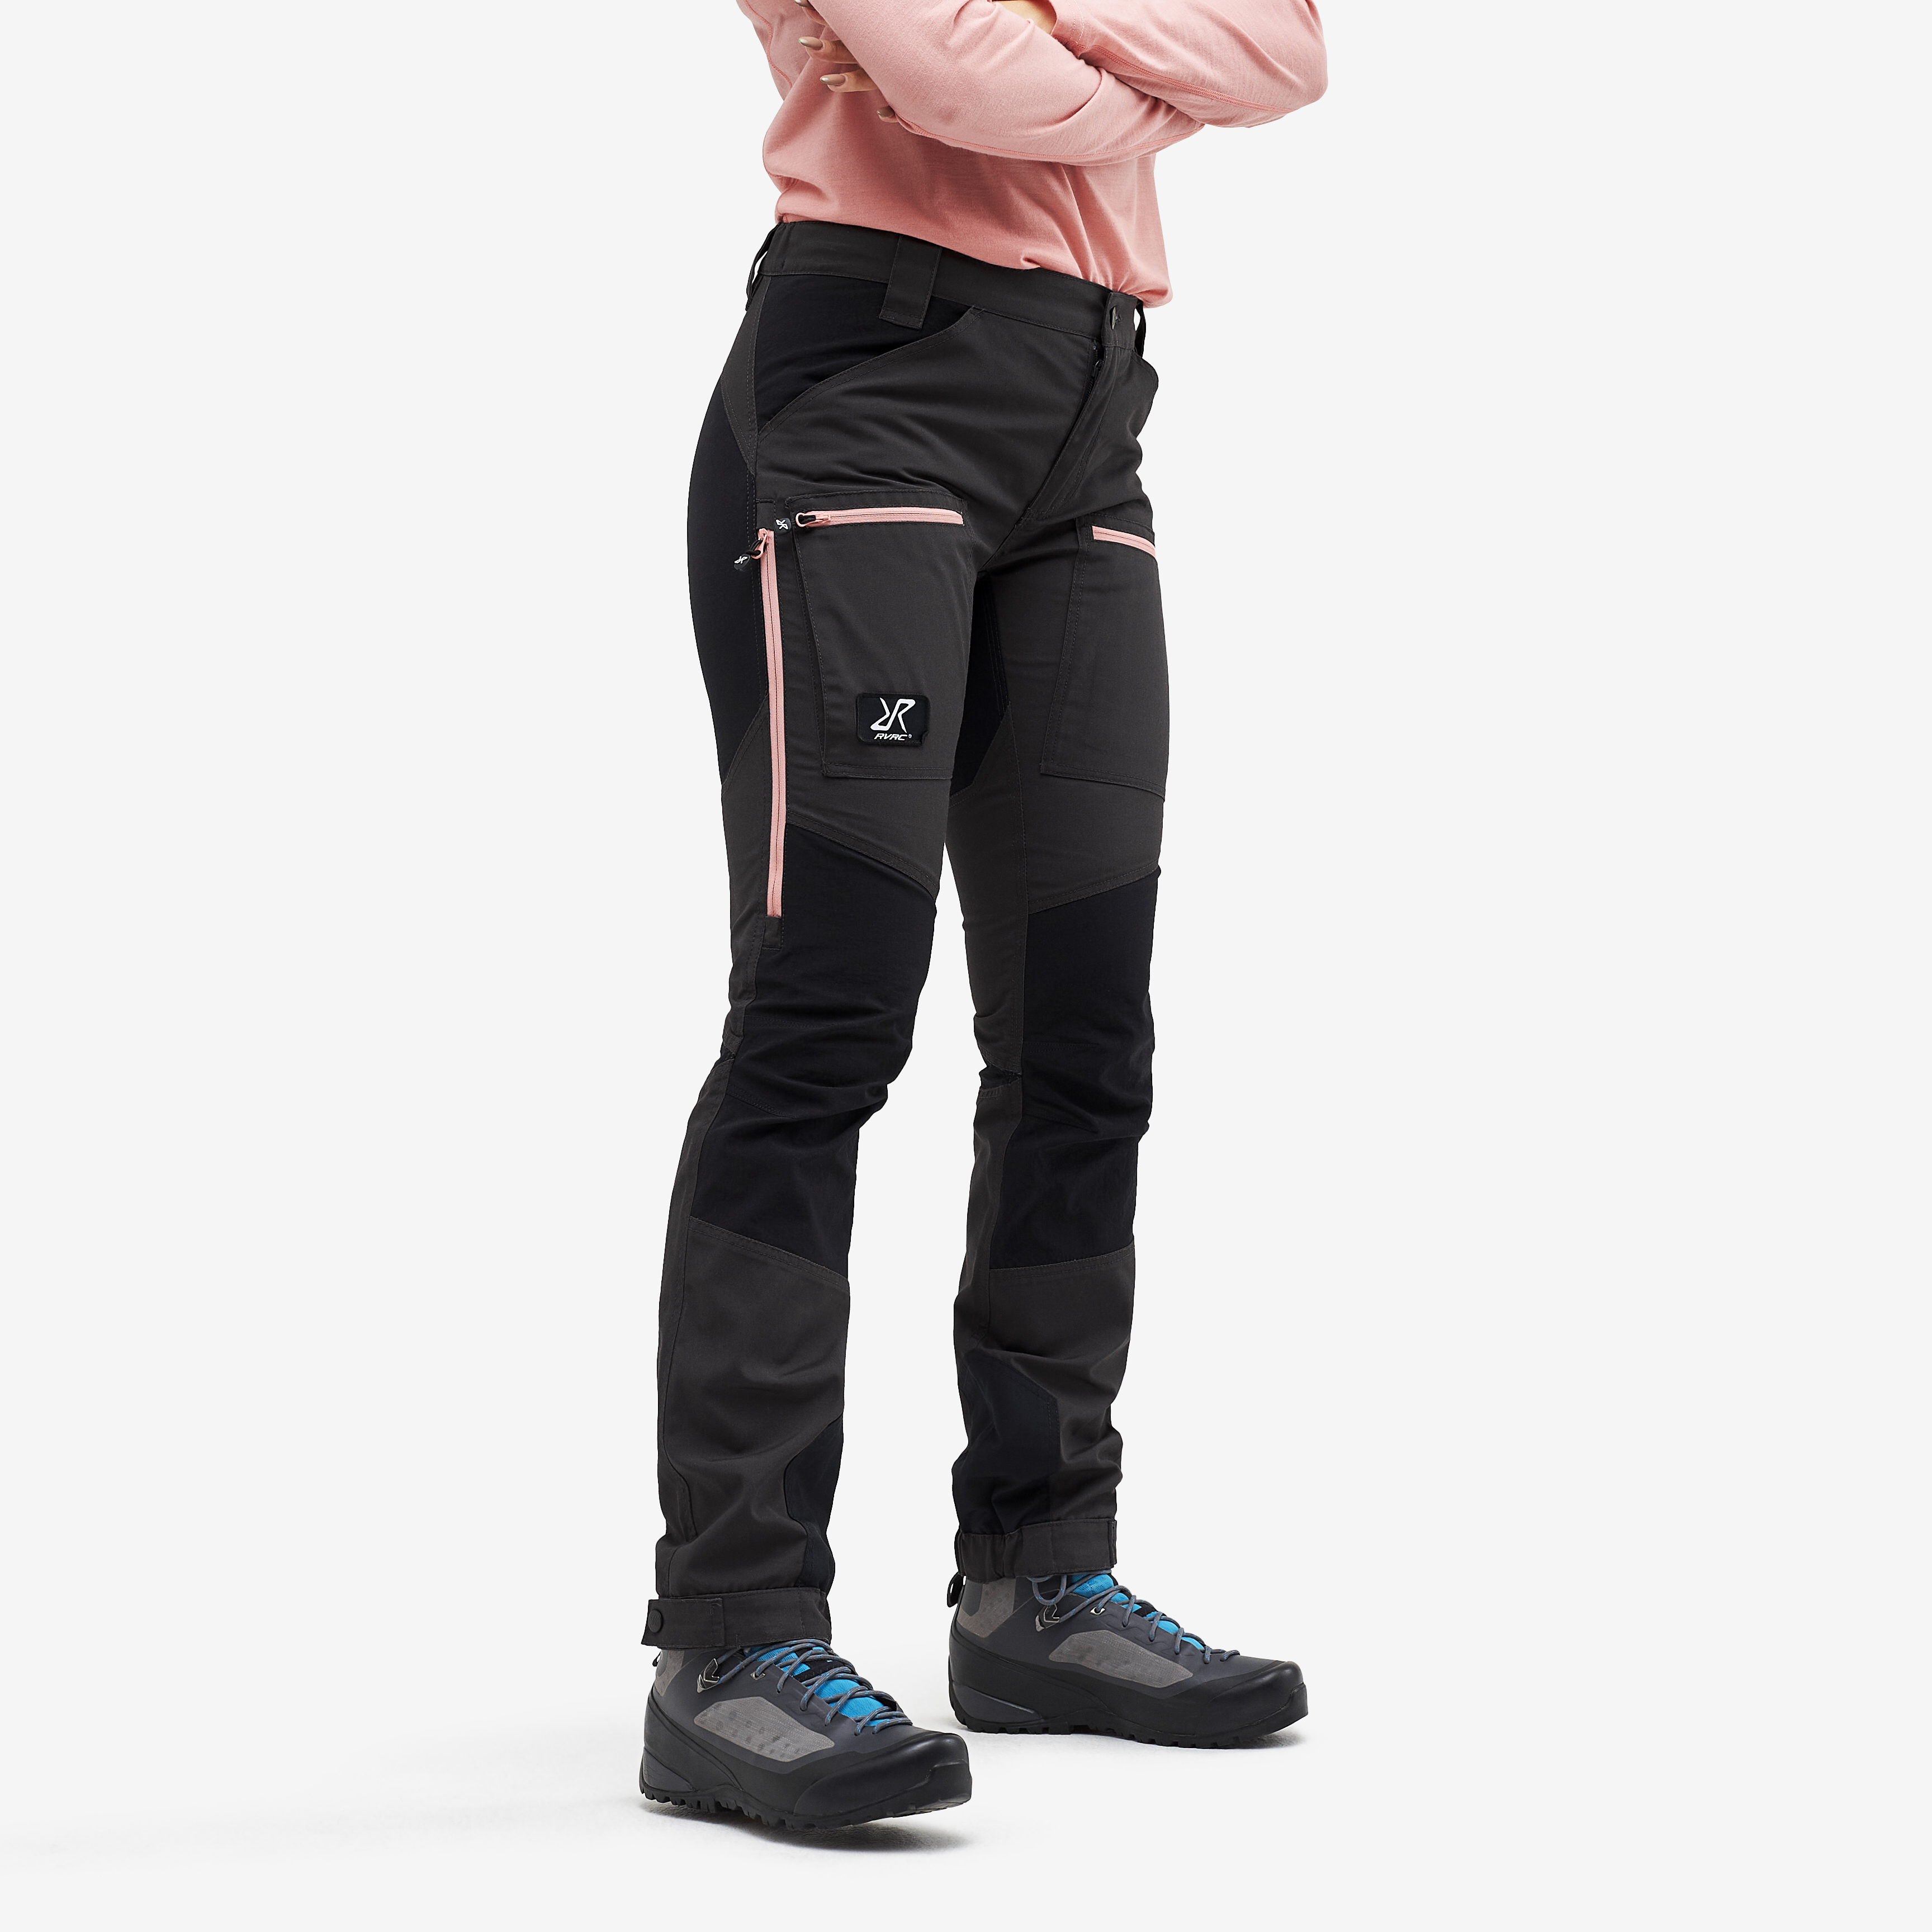 Nordwand Pro Pants Anthracite/Dusty pink Women